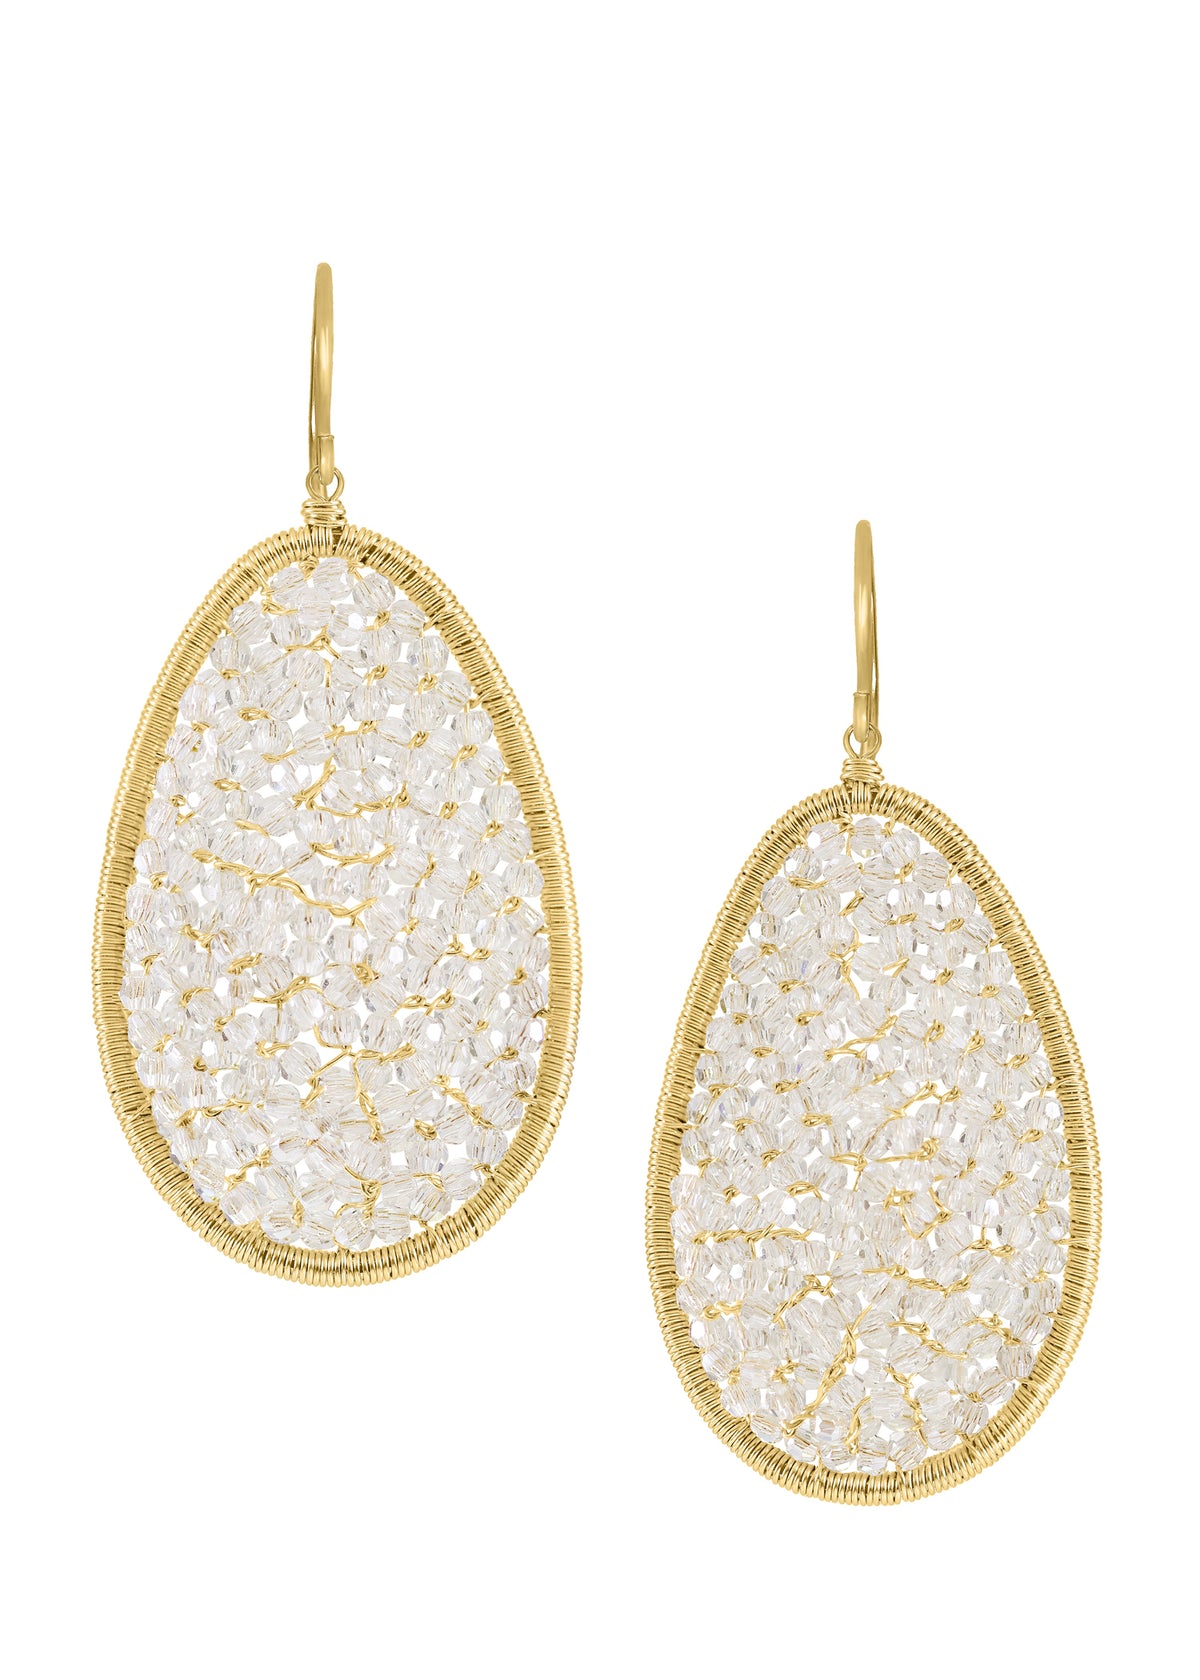 Crystal 14k gold fill Earrings measure 1-3/4&quot; in length (including the ear wires) and 13/16&quot; in width at the widest point Handmade in our Los Angeles studio